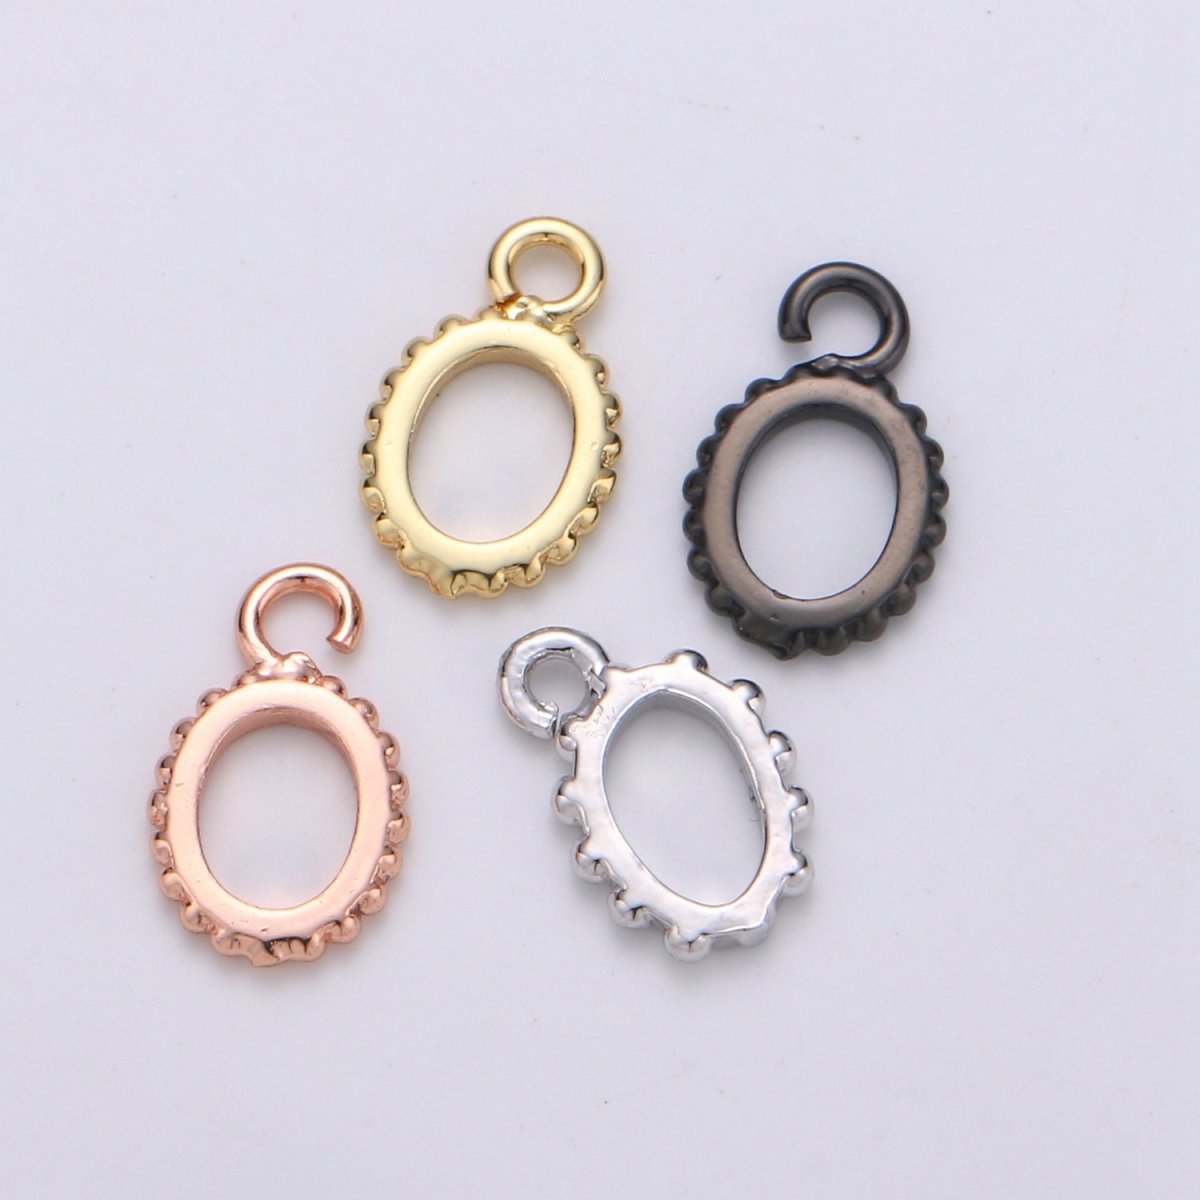 Oval Gold Bail, Silver bail, Lead Nickel free, Pendant bail Rose Gold bail for charm Necklace making supplies, Jewelry supplies K-811 - K-814 - DLUXCA